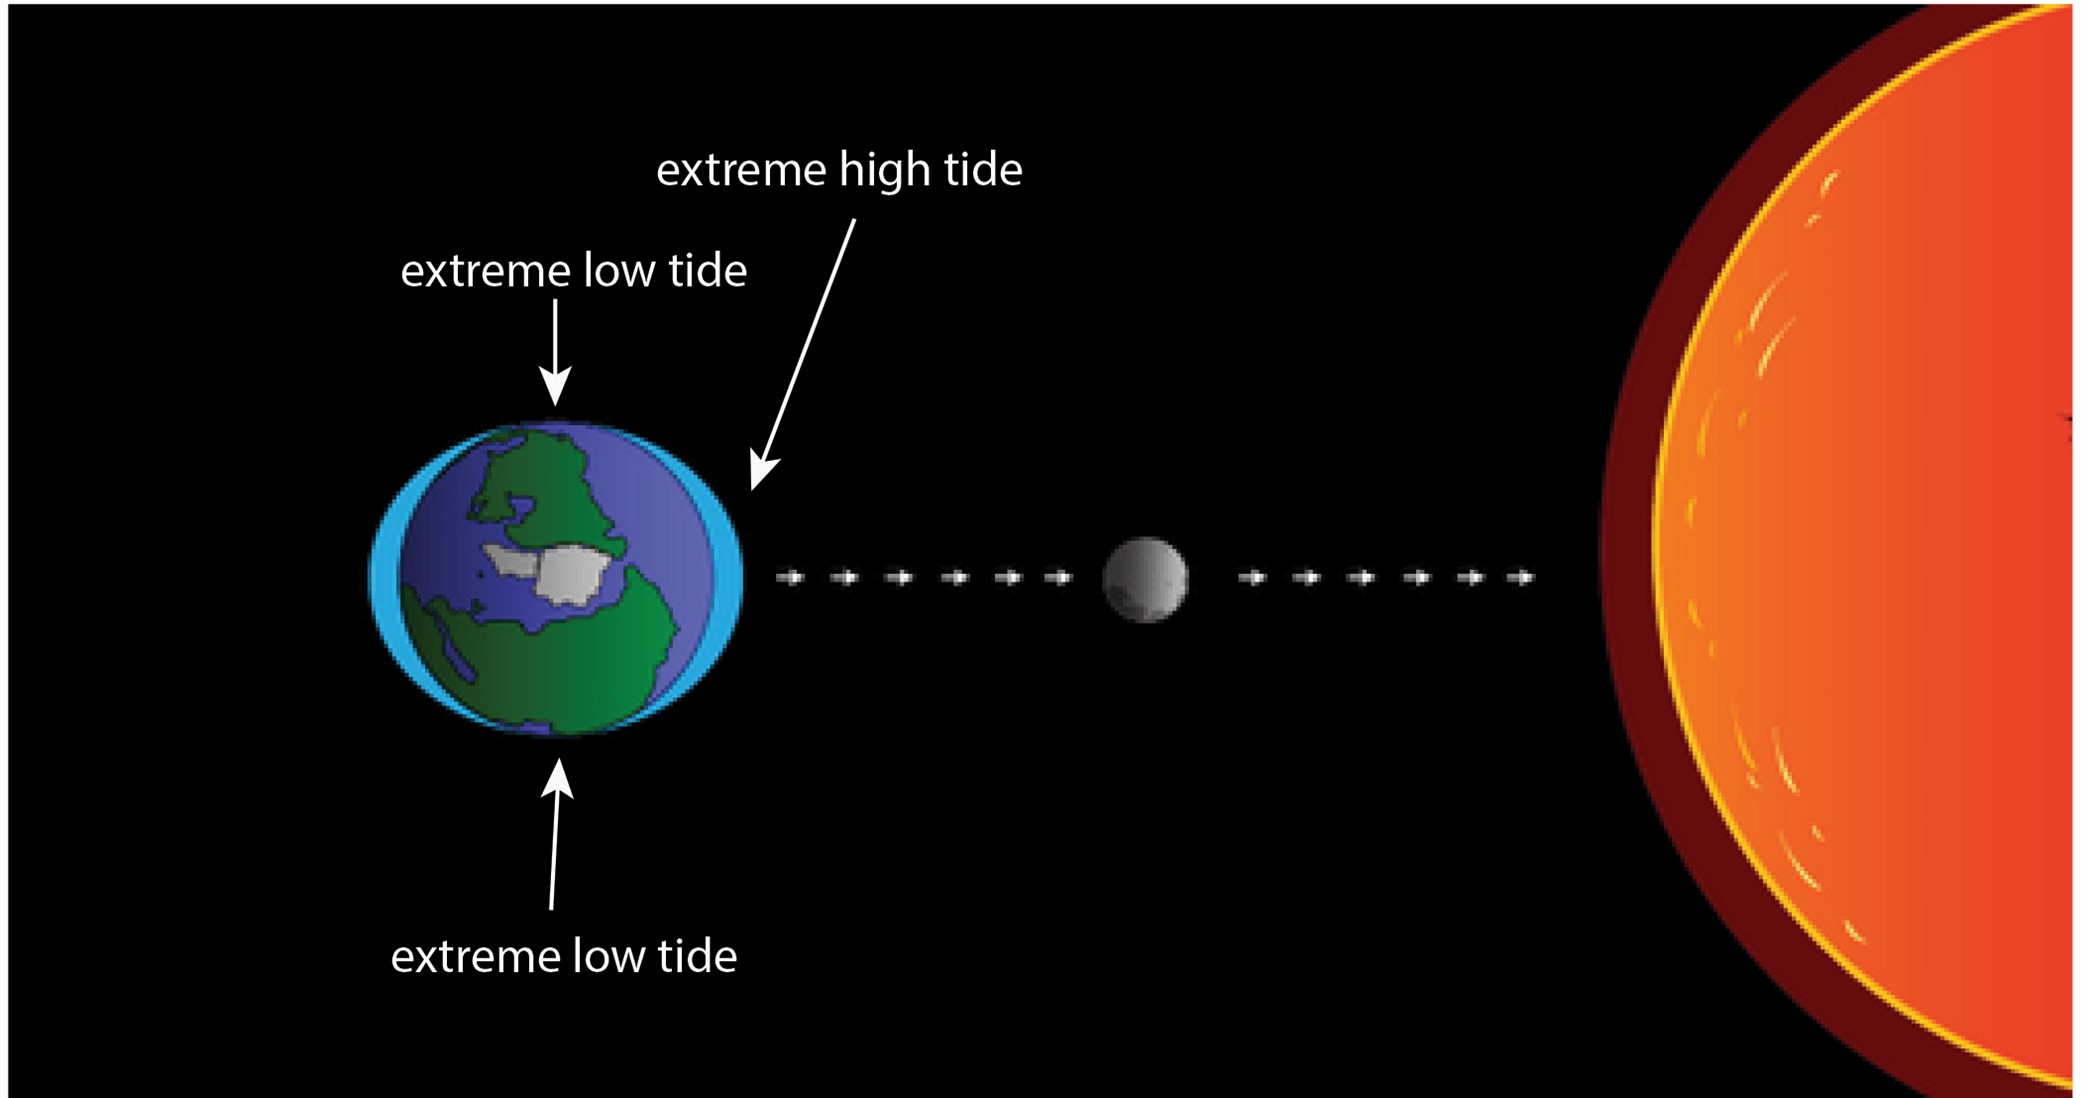 Schematic showing how tides are produced